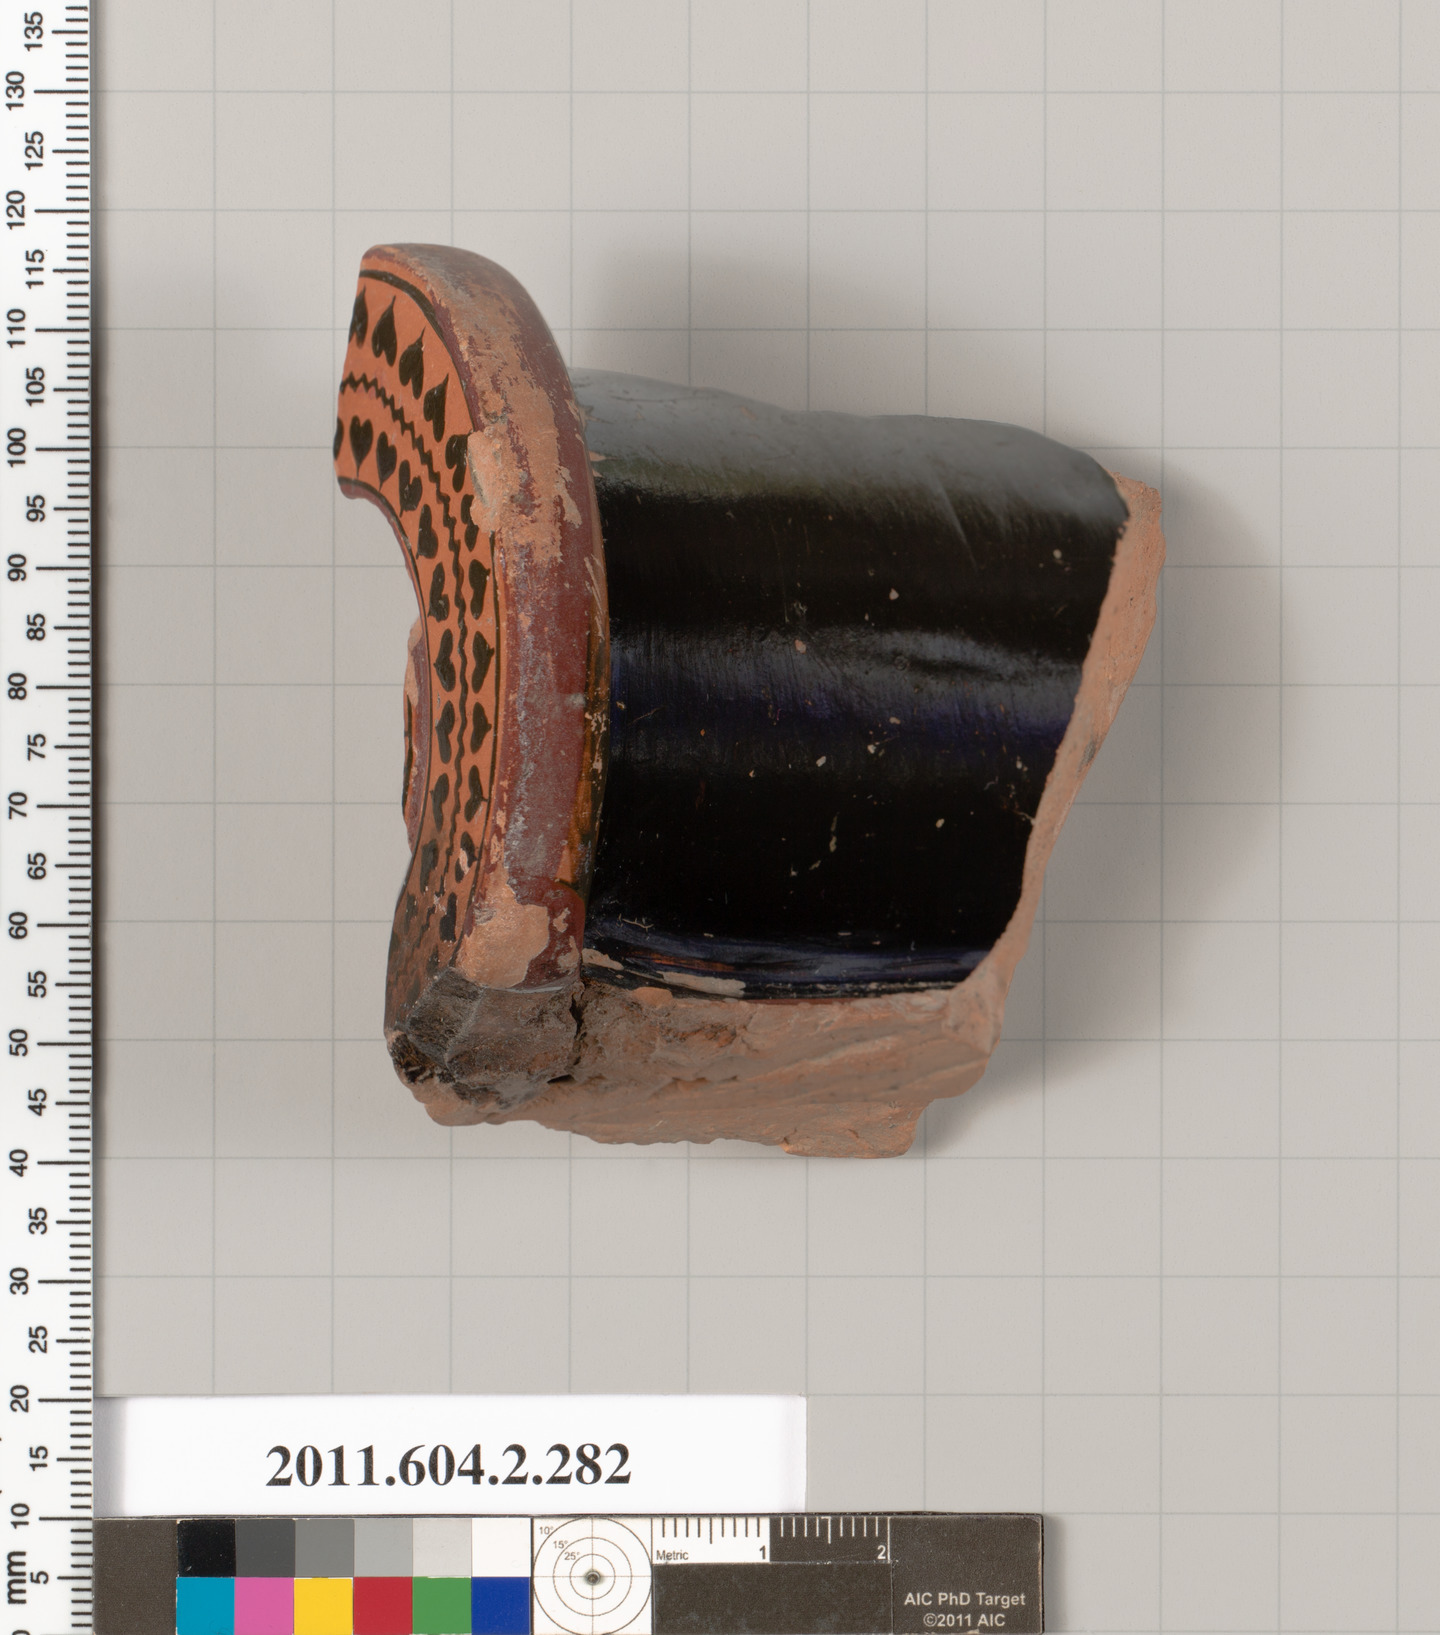 download free terracotta volute krater